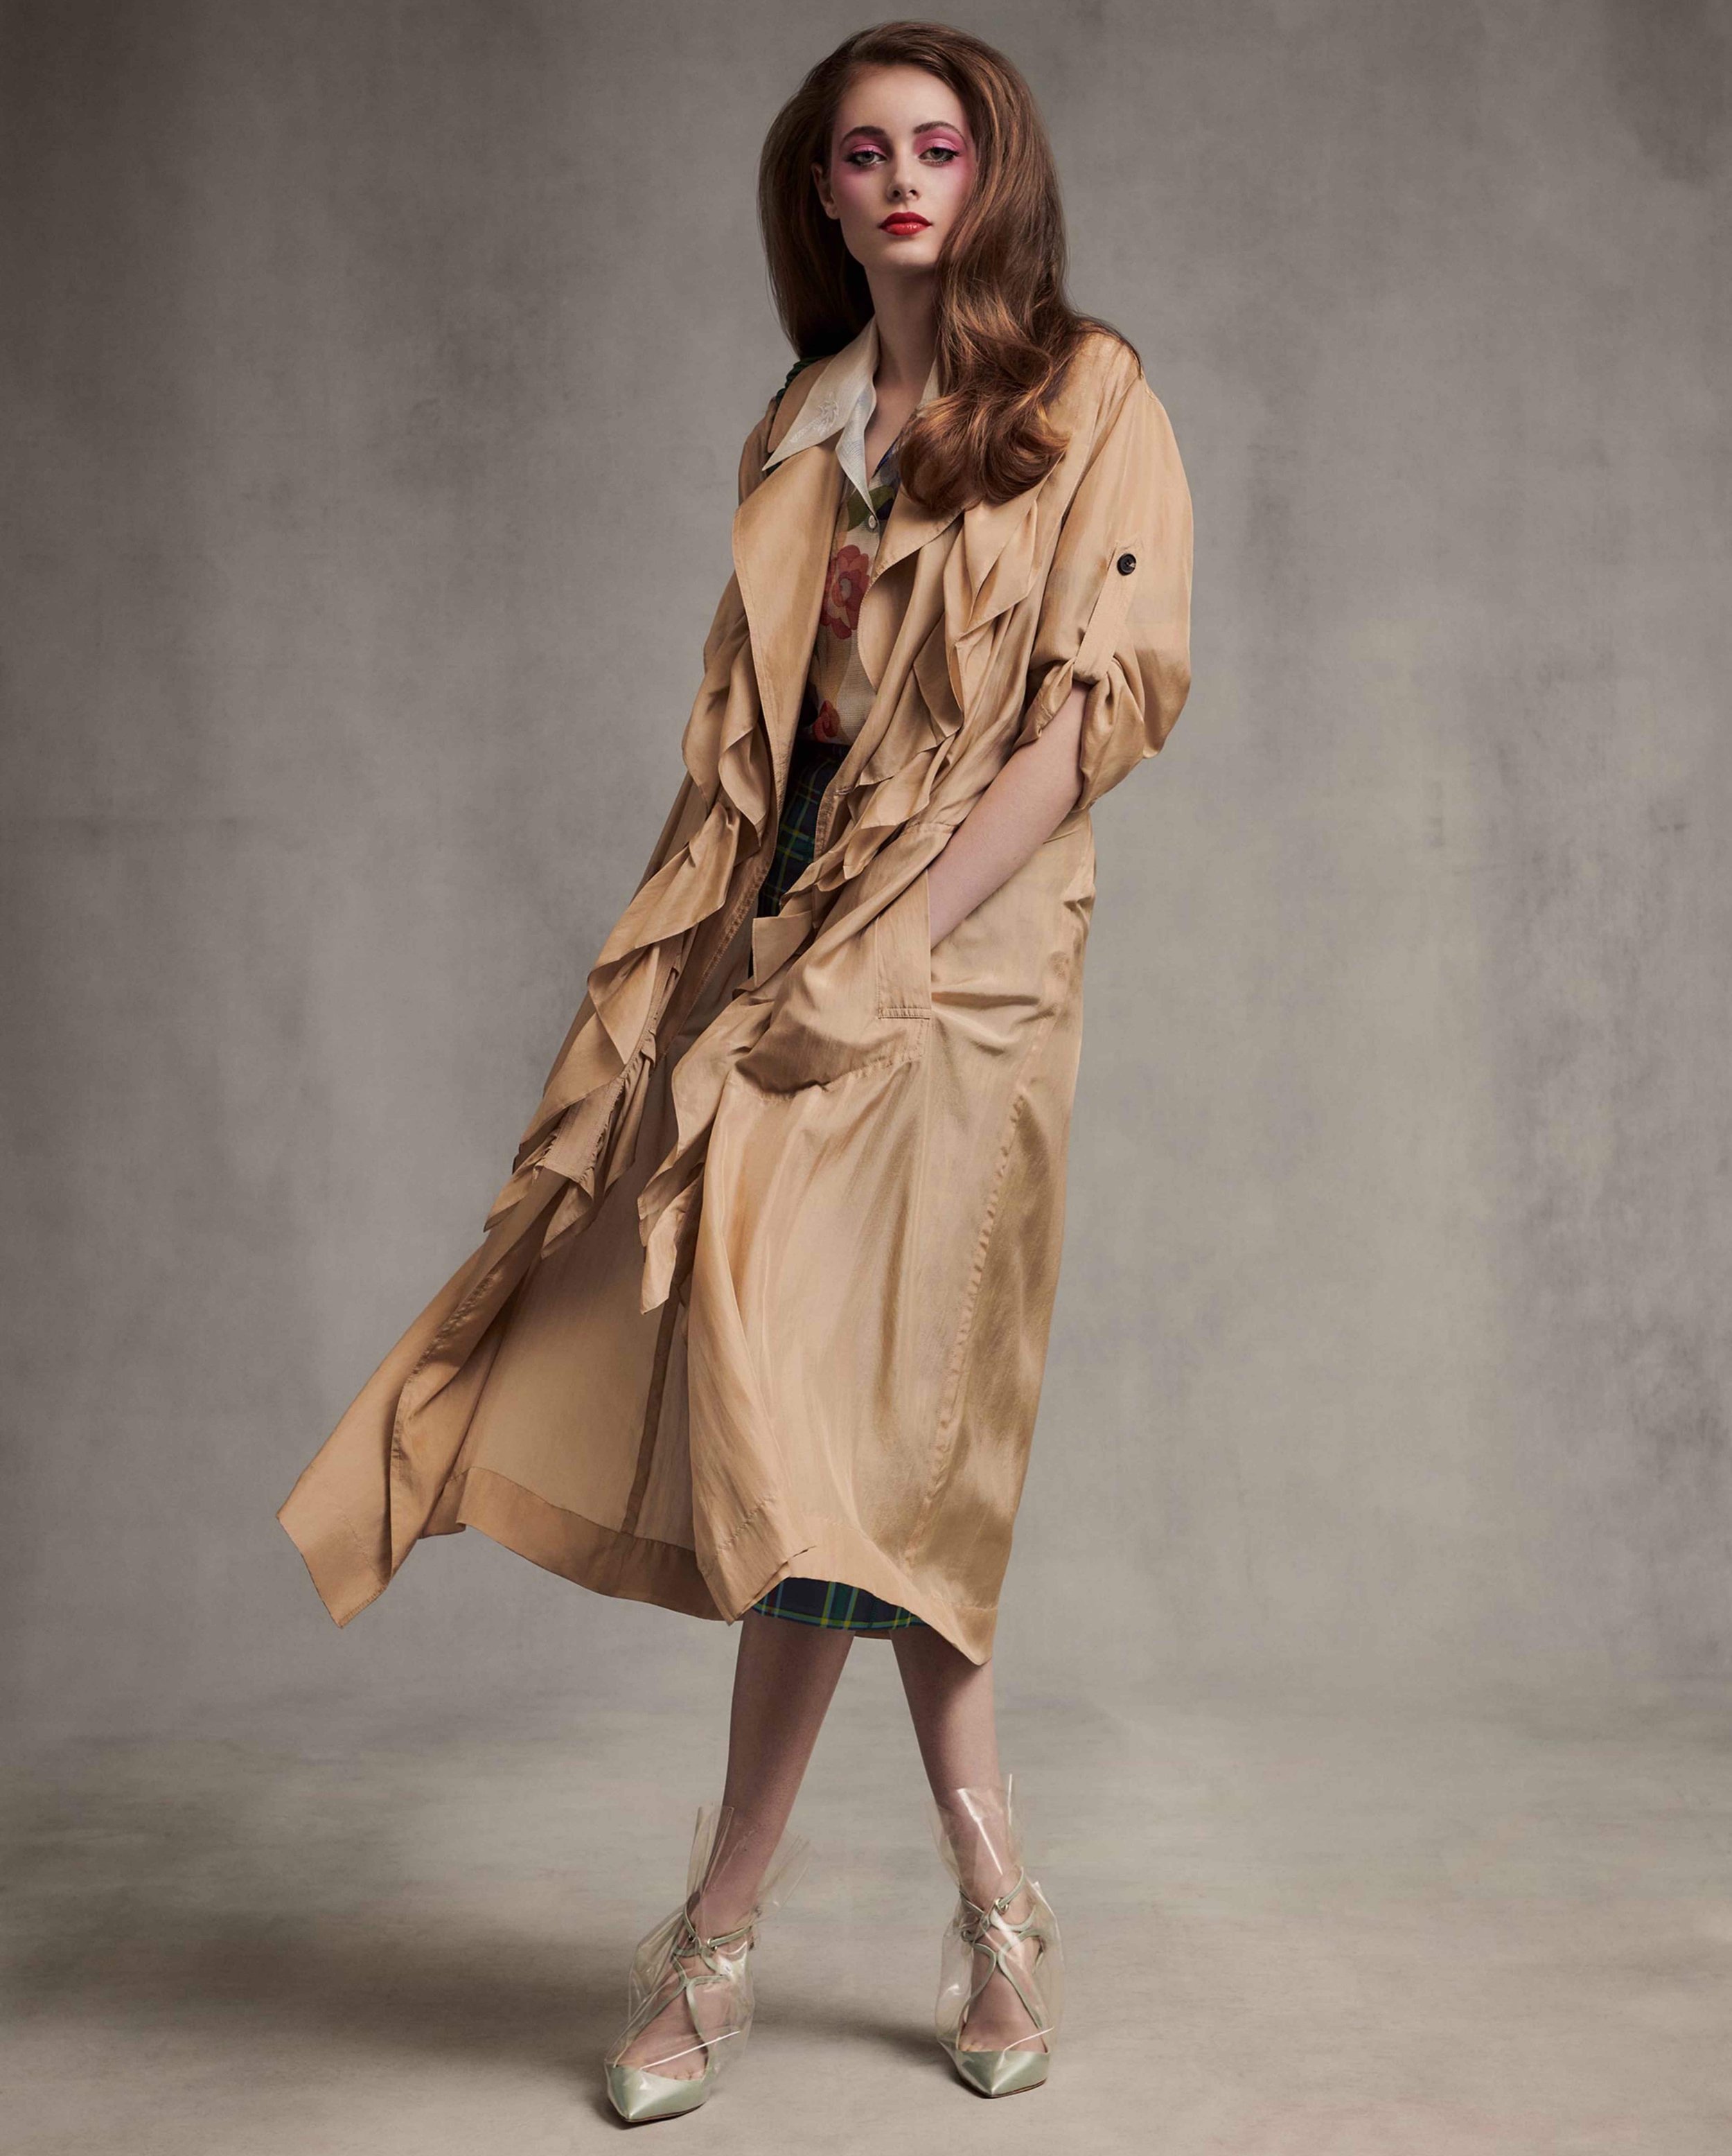 Thairine Garcia Shows Off Spring Trench Coats Lensed By Sonny McCartney ...